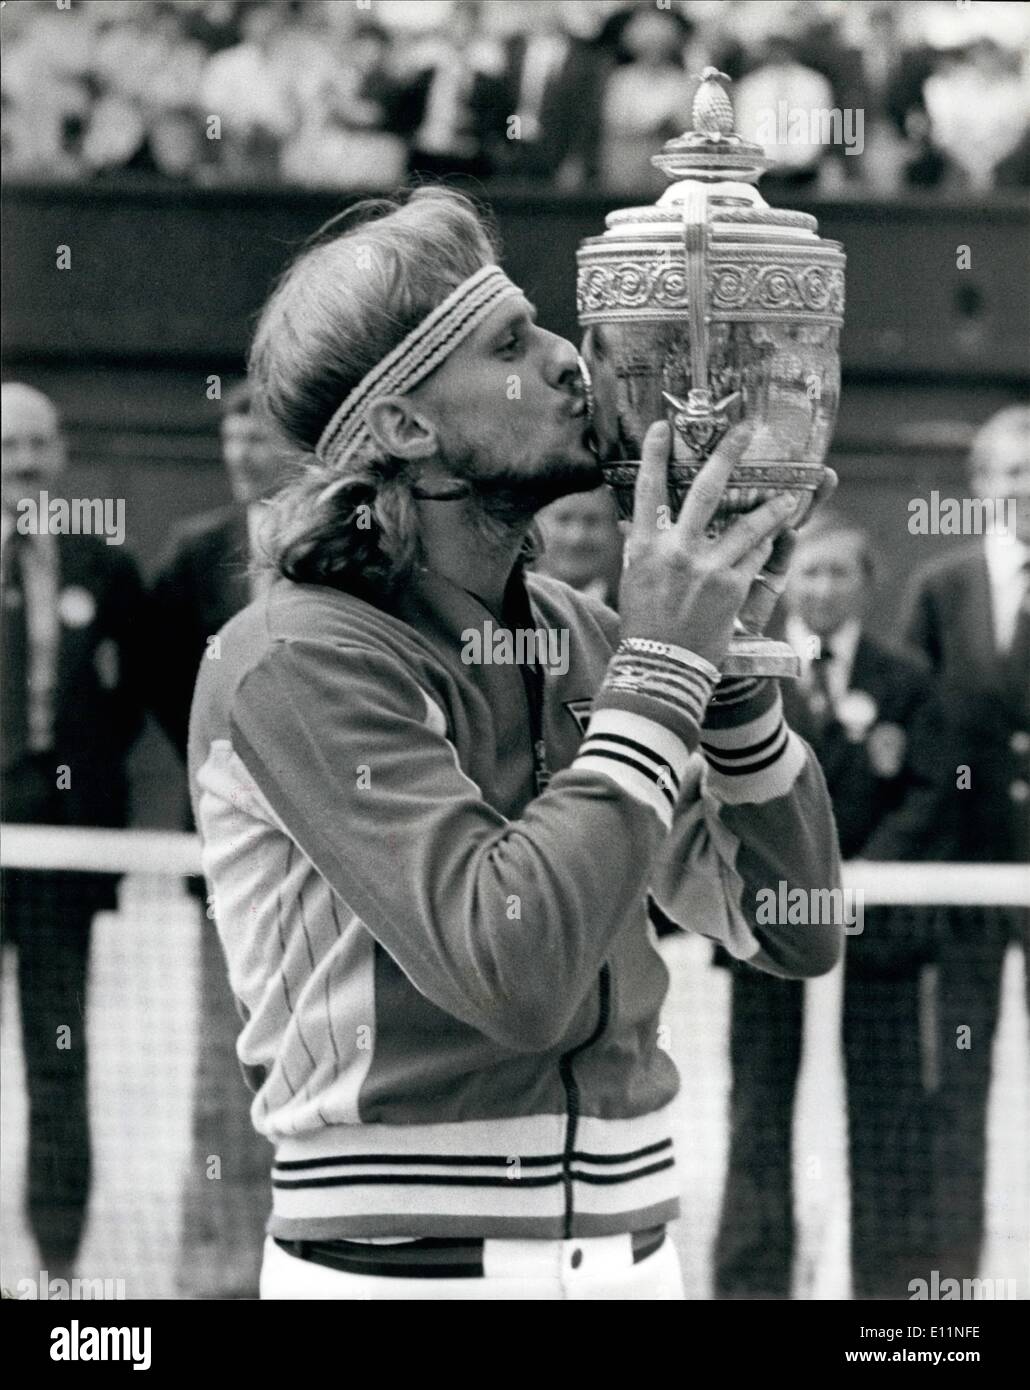 Jul. 07, 1979 - Bjorn Borg Wins his fourth Successive Wimbledon title beating Roscoe Tanner in Five sets: Today of the Centre Court at Wimbledon Bjorn Borg of Sweden won the Men's singles title for the fourth successive time when he beat American Roscoe Tanner in five sets. Photo shows Borg kissing the trophy after winning the men's singles title once again on the centre court at Wimbledon today. Stock Photo